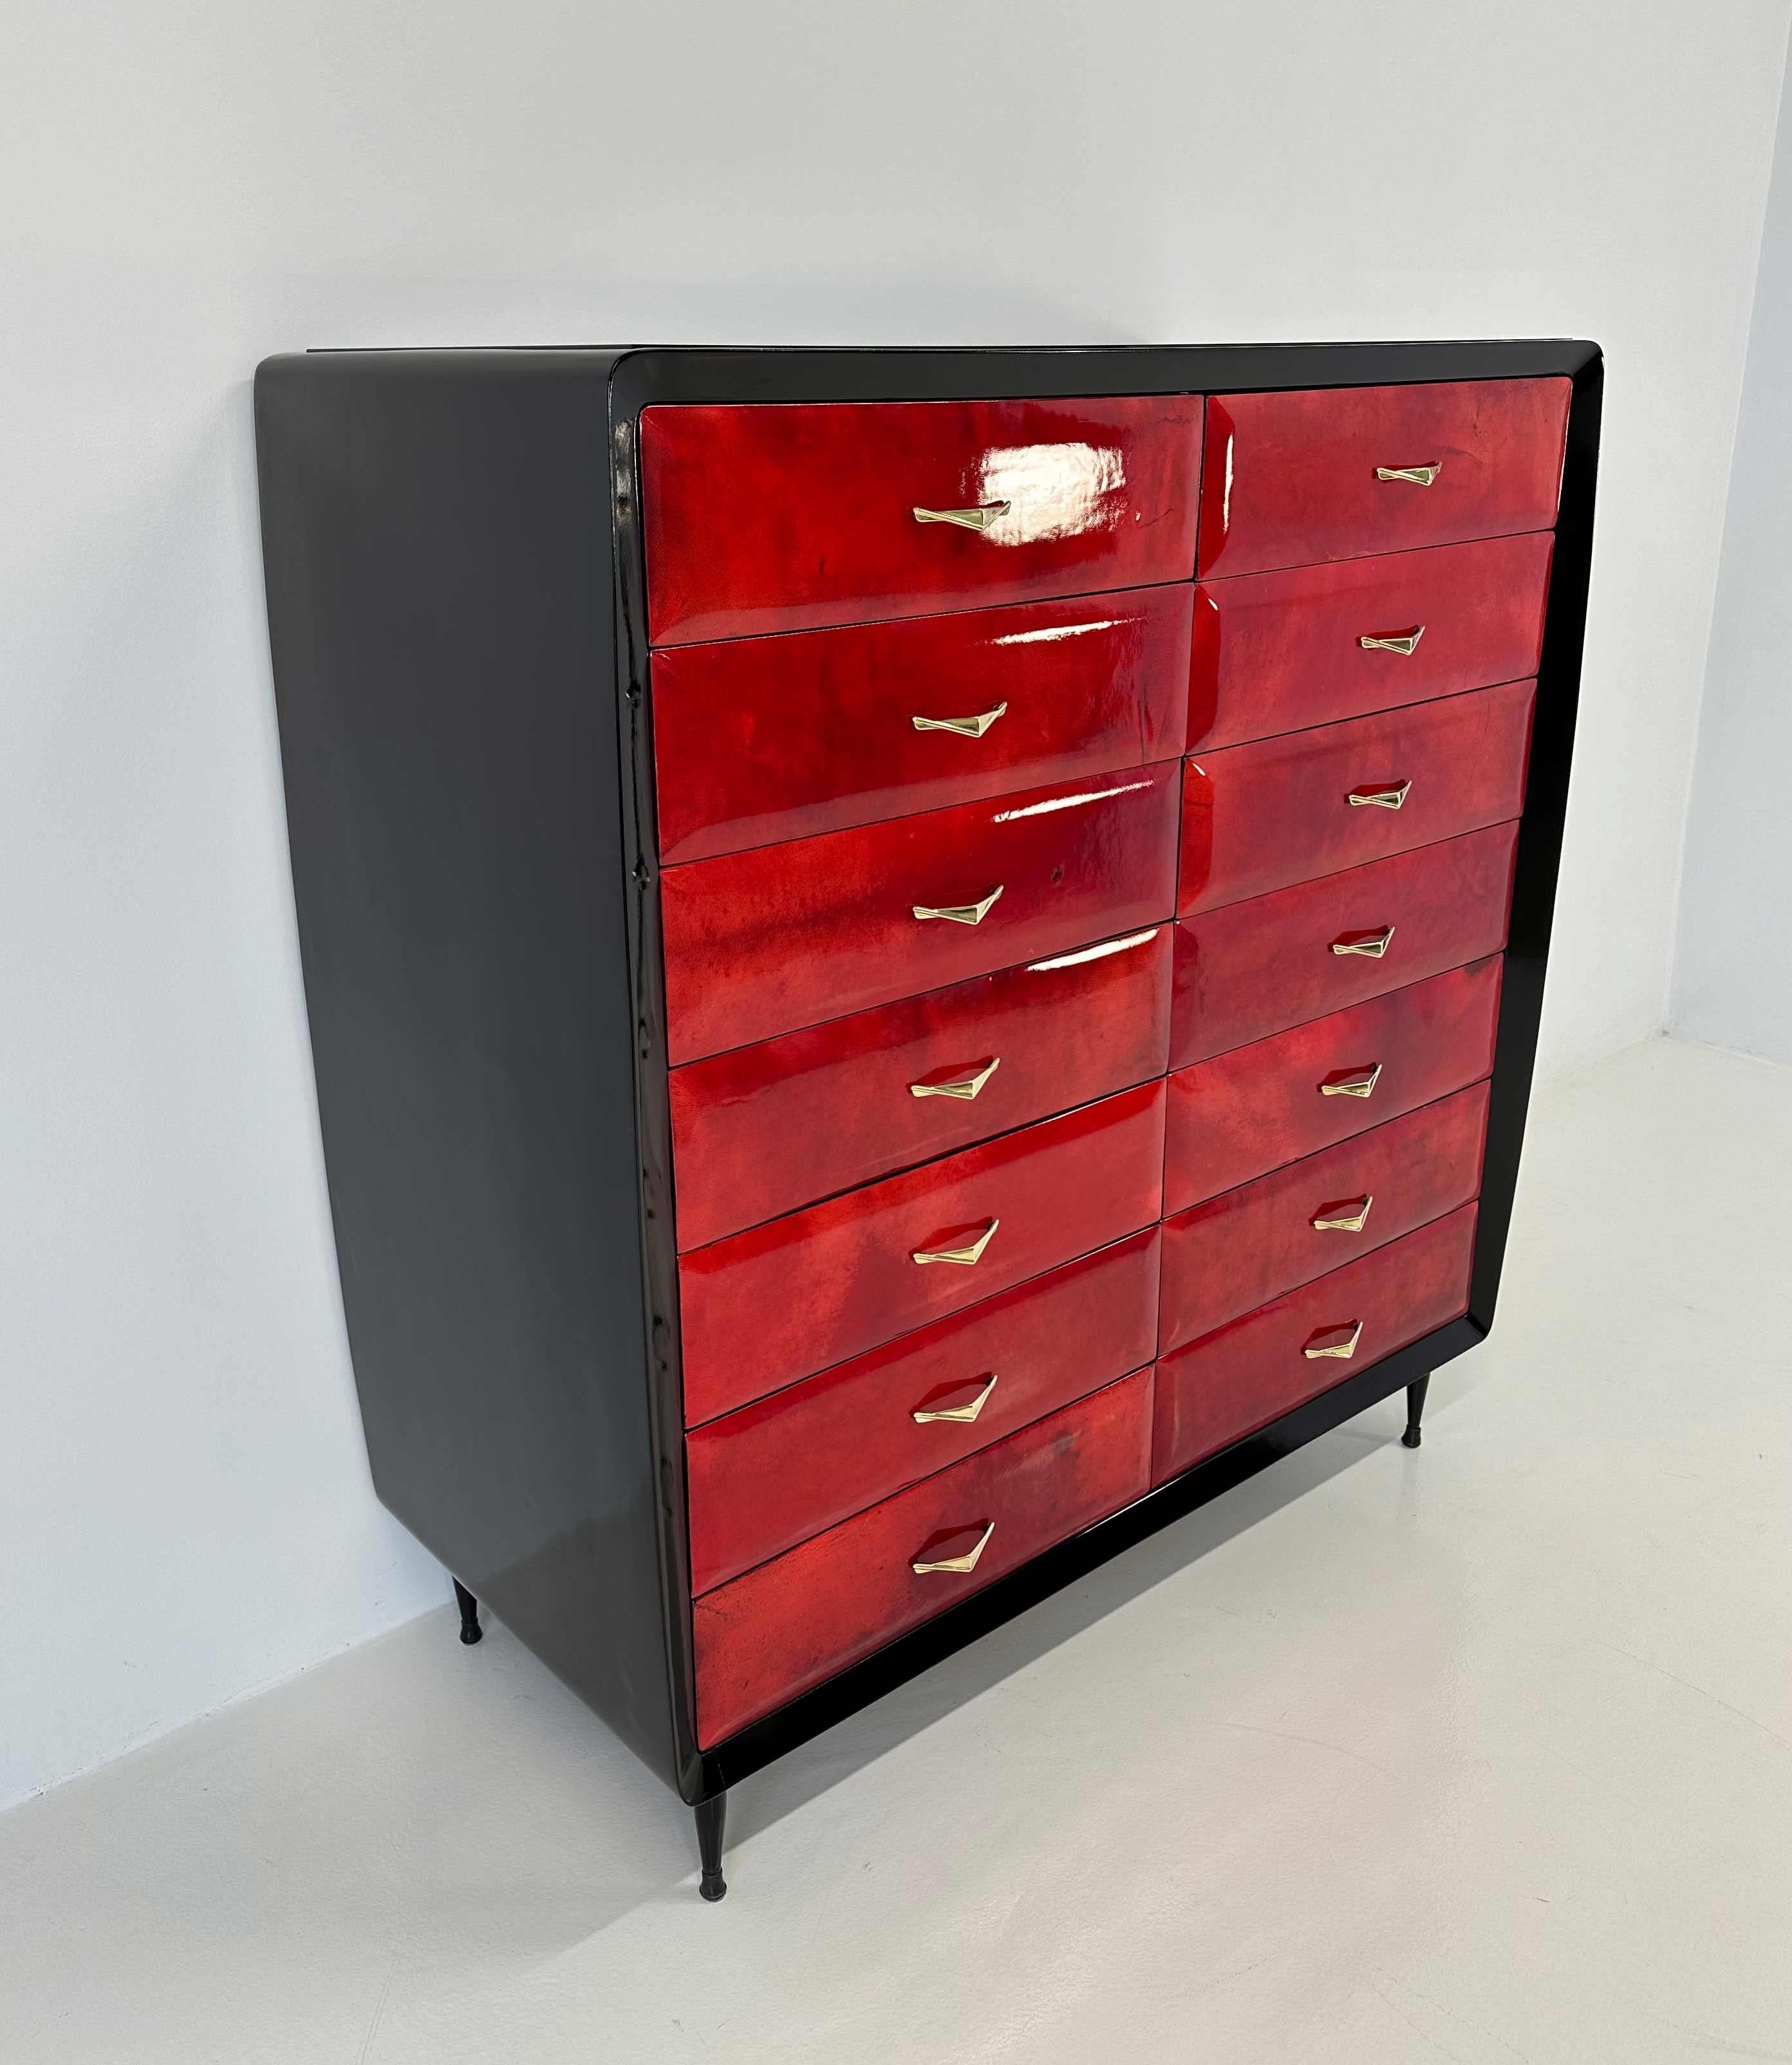 Lacquer Italian Art Deco Cherry Red Parchment Chest of 14 Drawers, 1950s For Sale